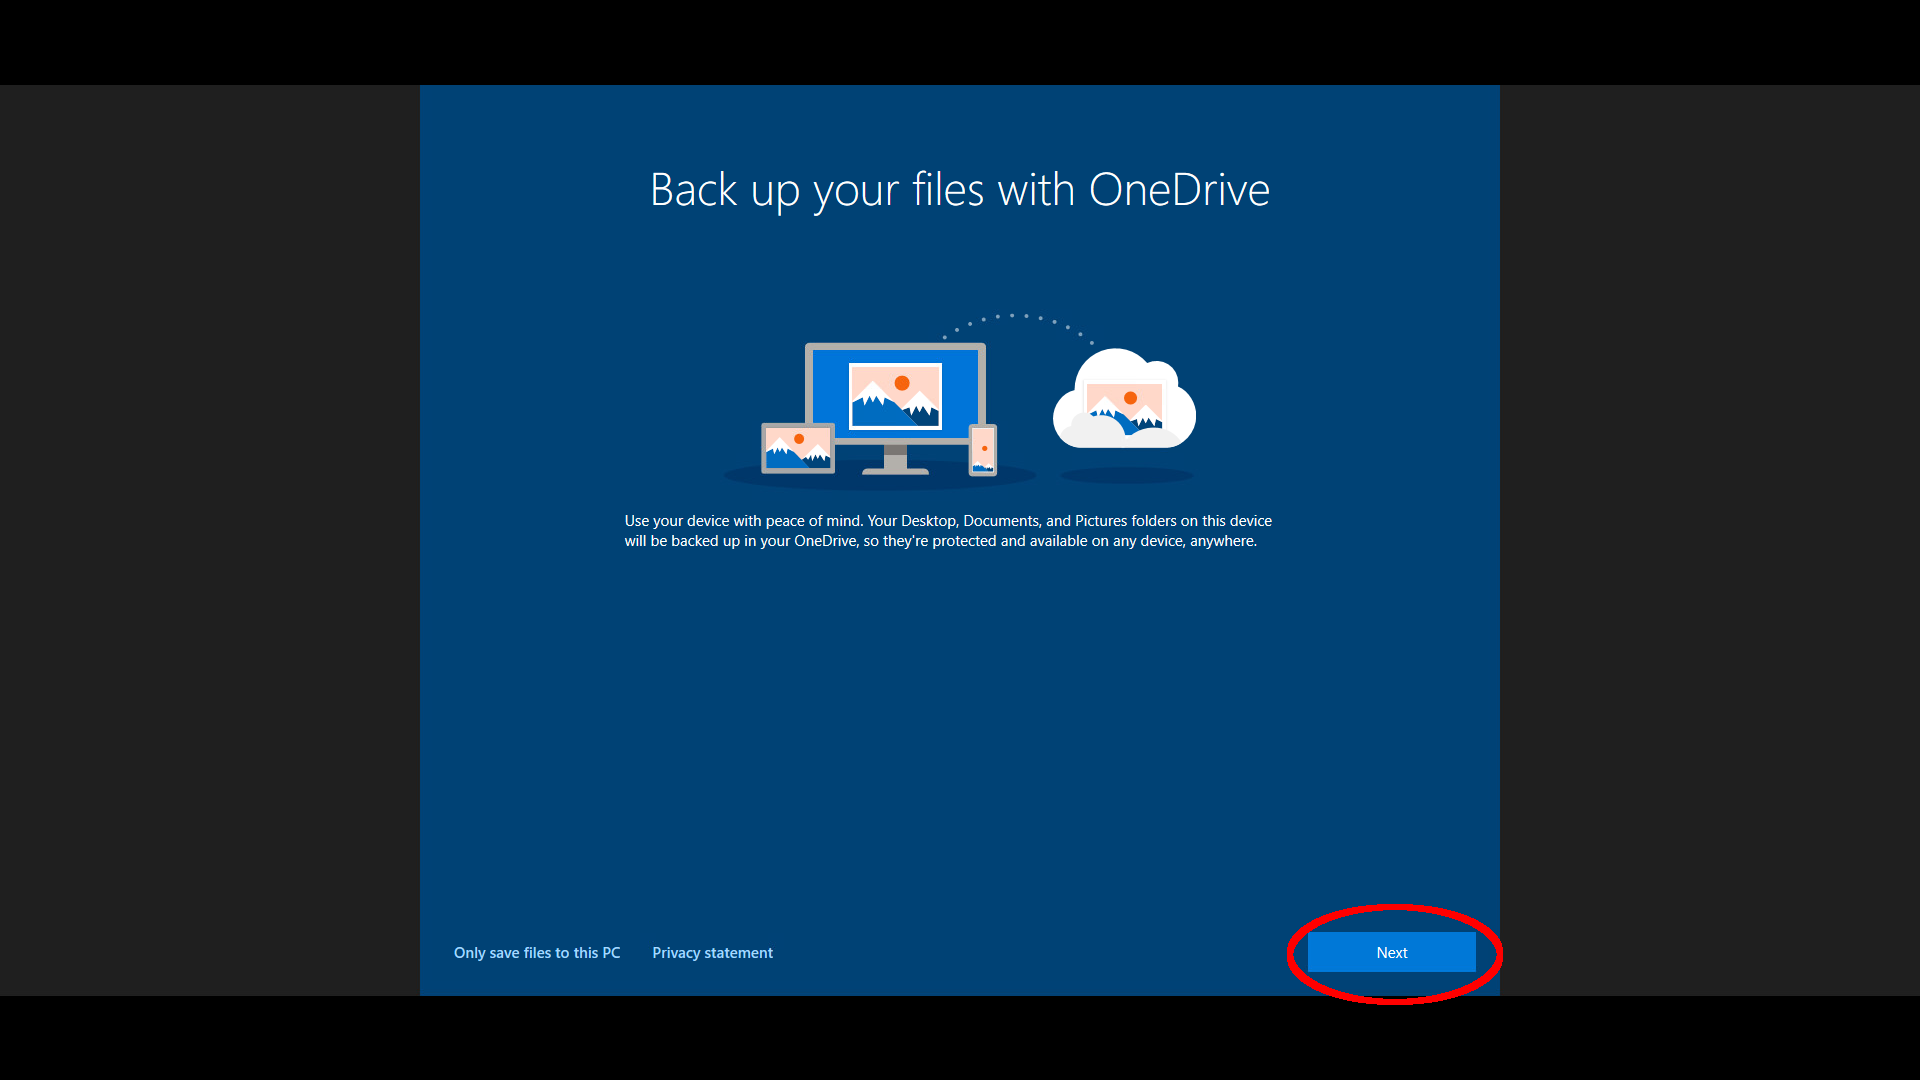 Microsoft explains the on-by-default OneDrive backup system, with Next circled in red